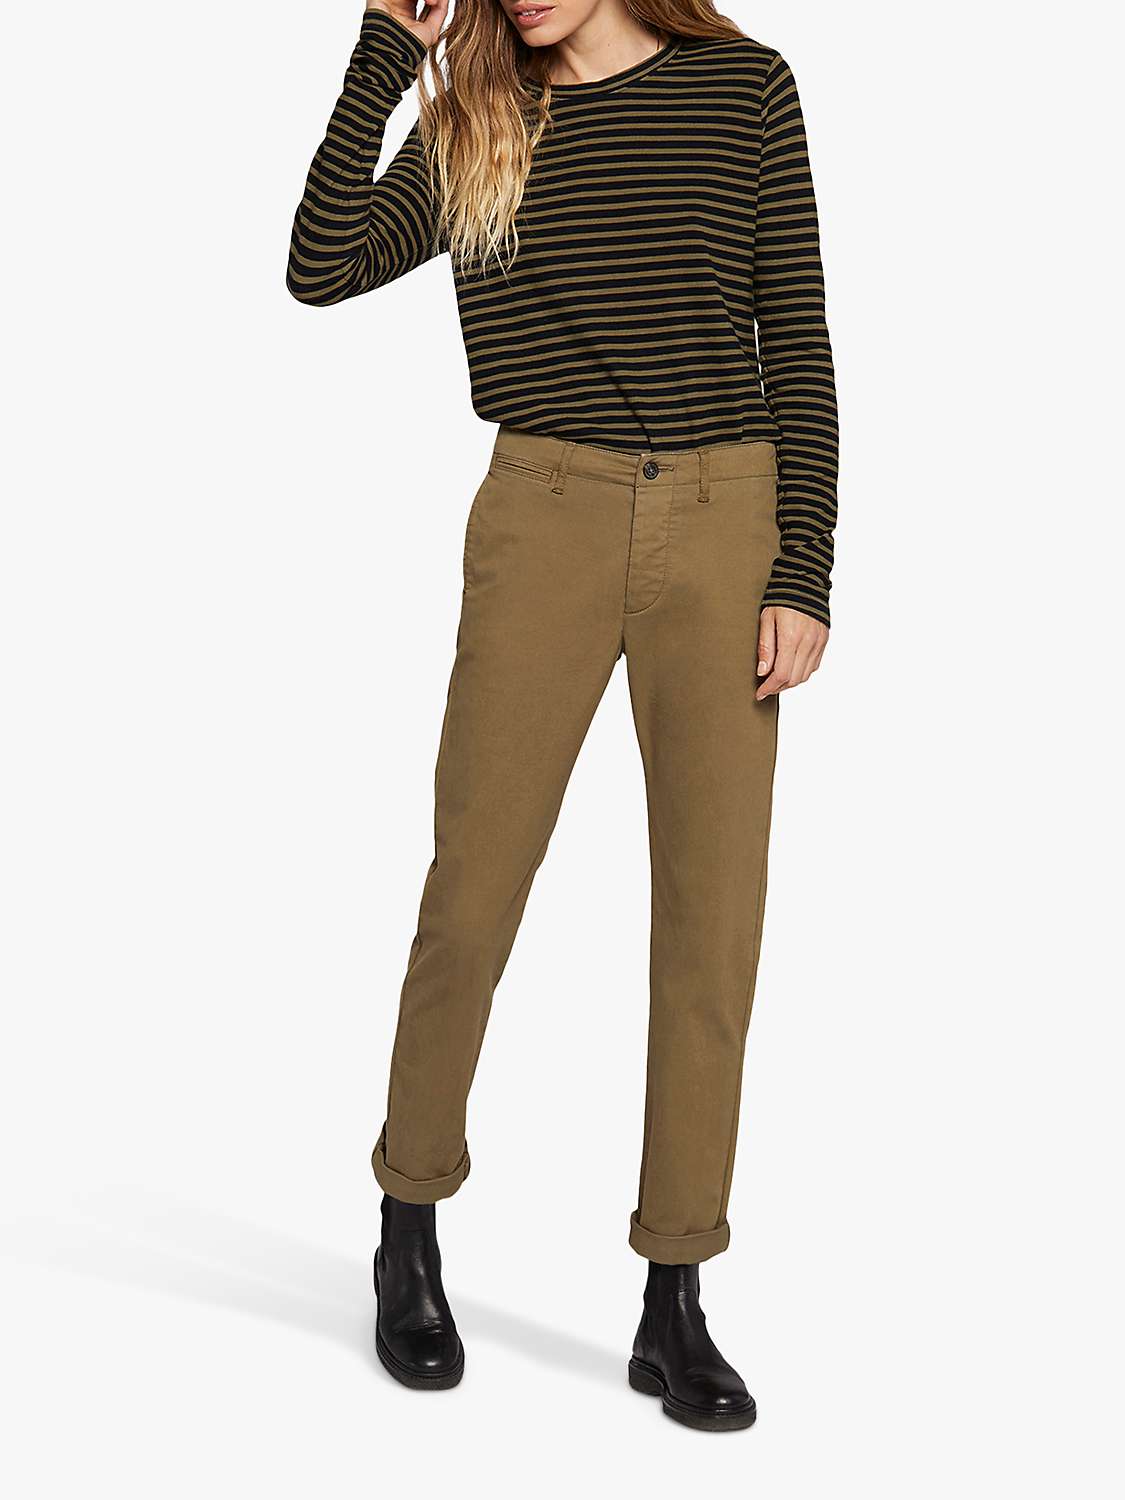 Buy Current/Elliott The Captain Chino Trousers Online at johnlewis.com